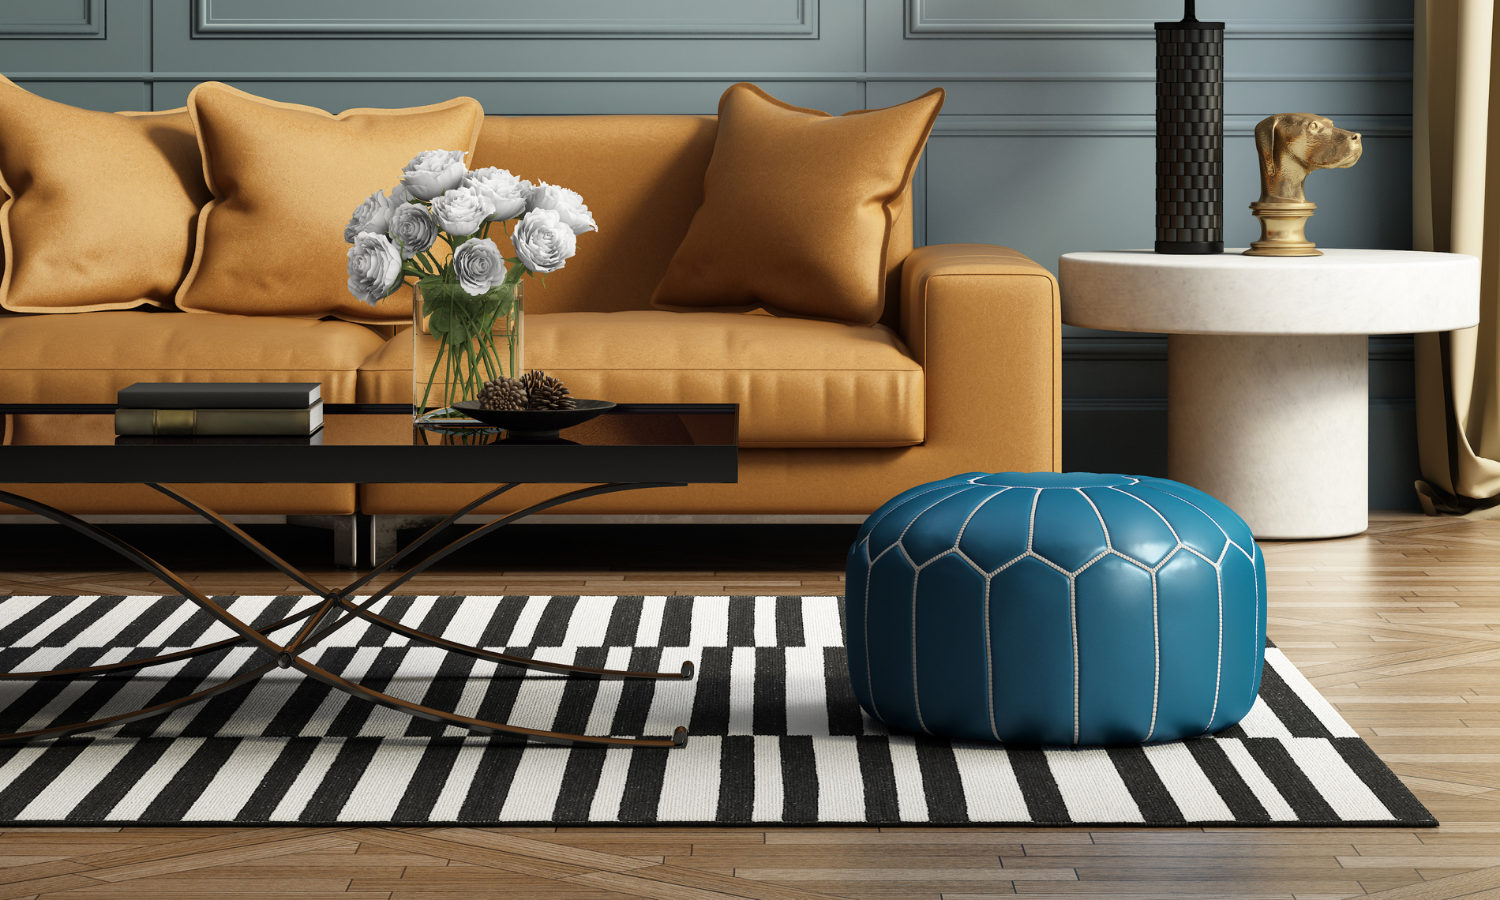 Tips For Decorating The Living Room With Rugs